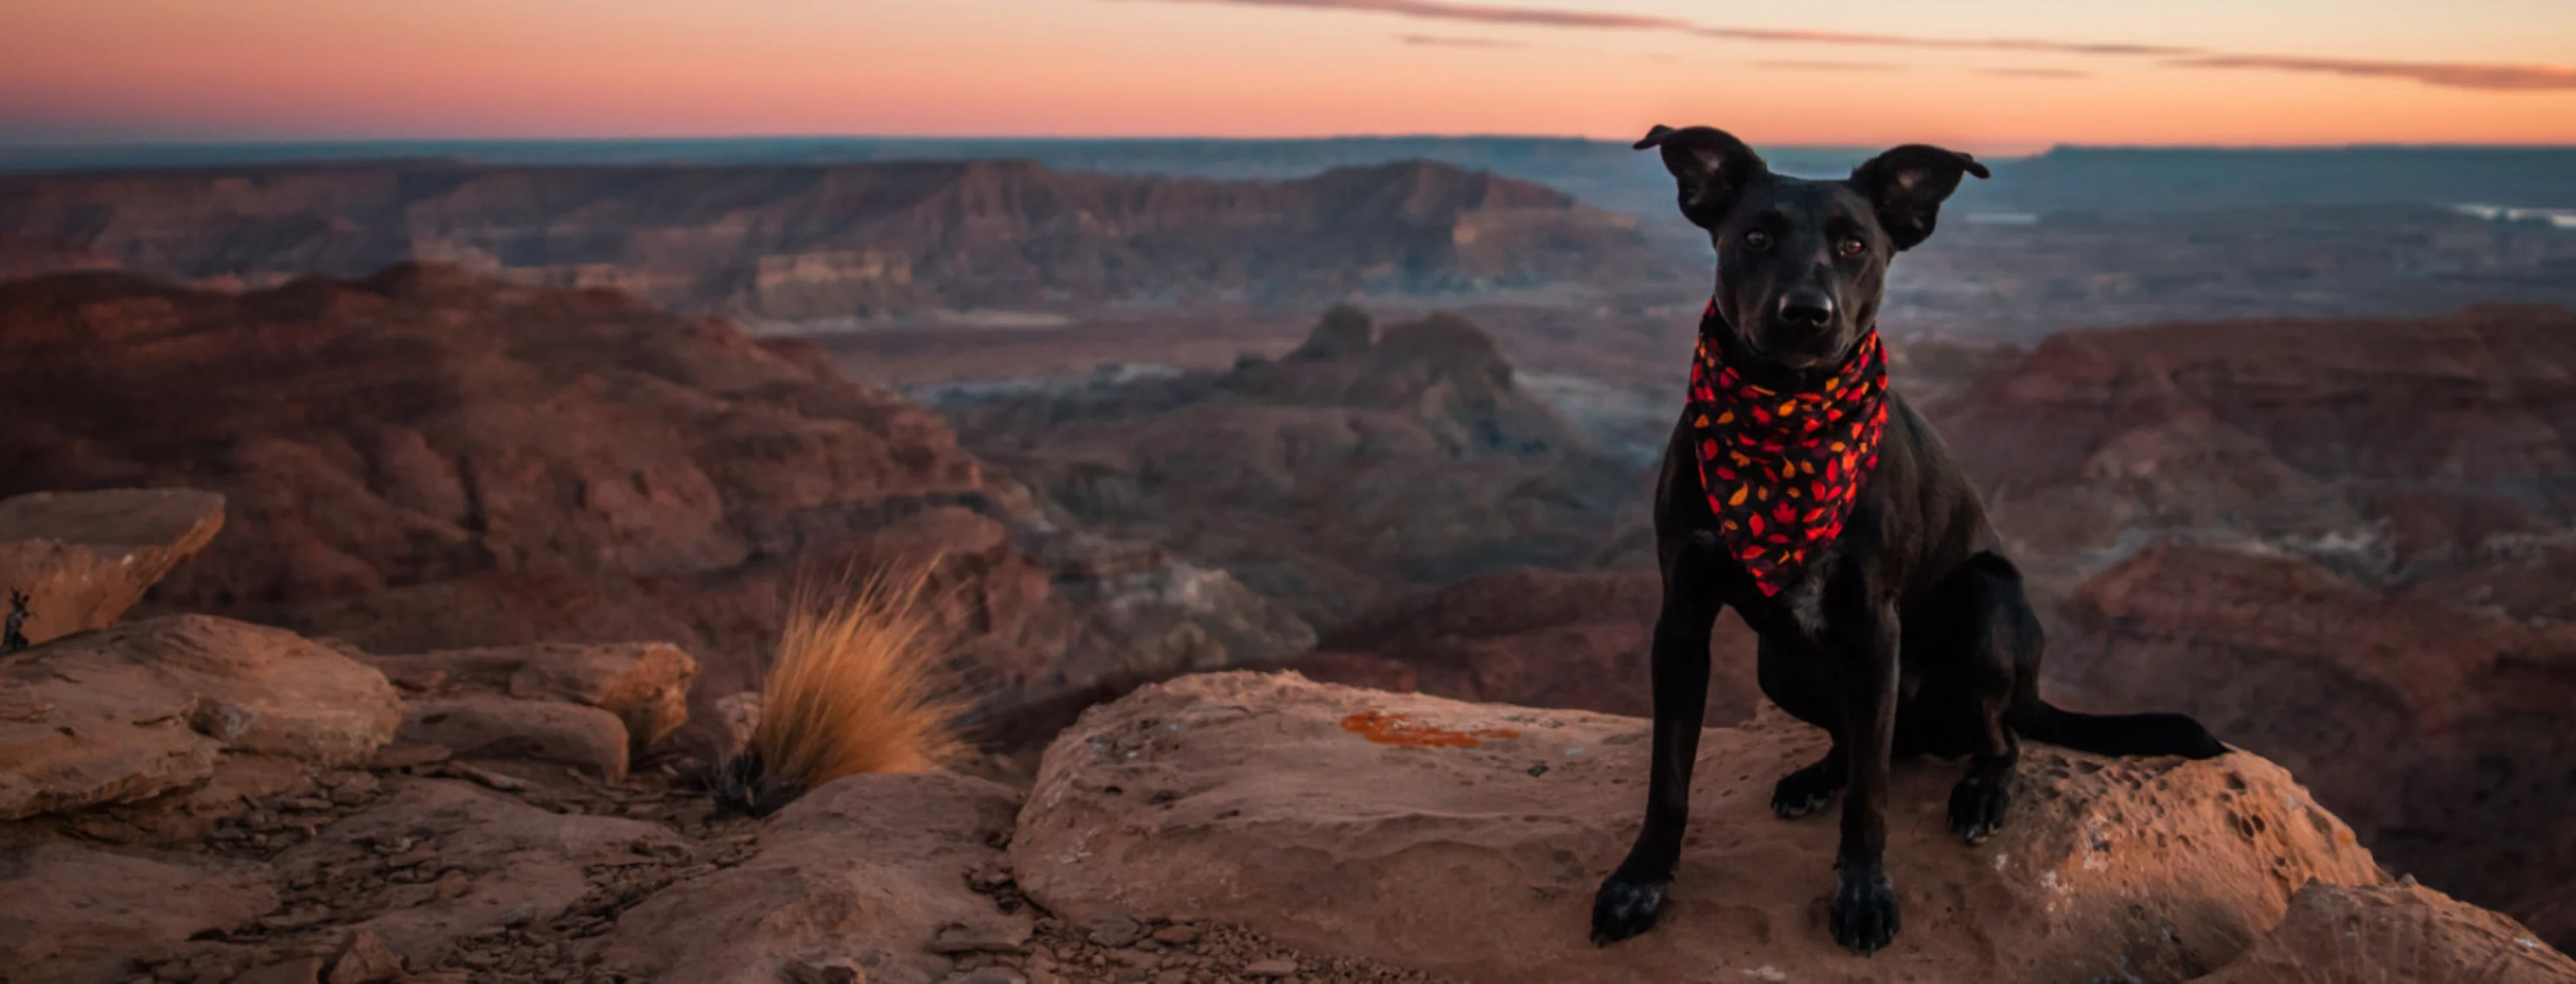 Black Dog with Red Bandana Sitting on Canyon Rocks in the Desert